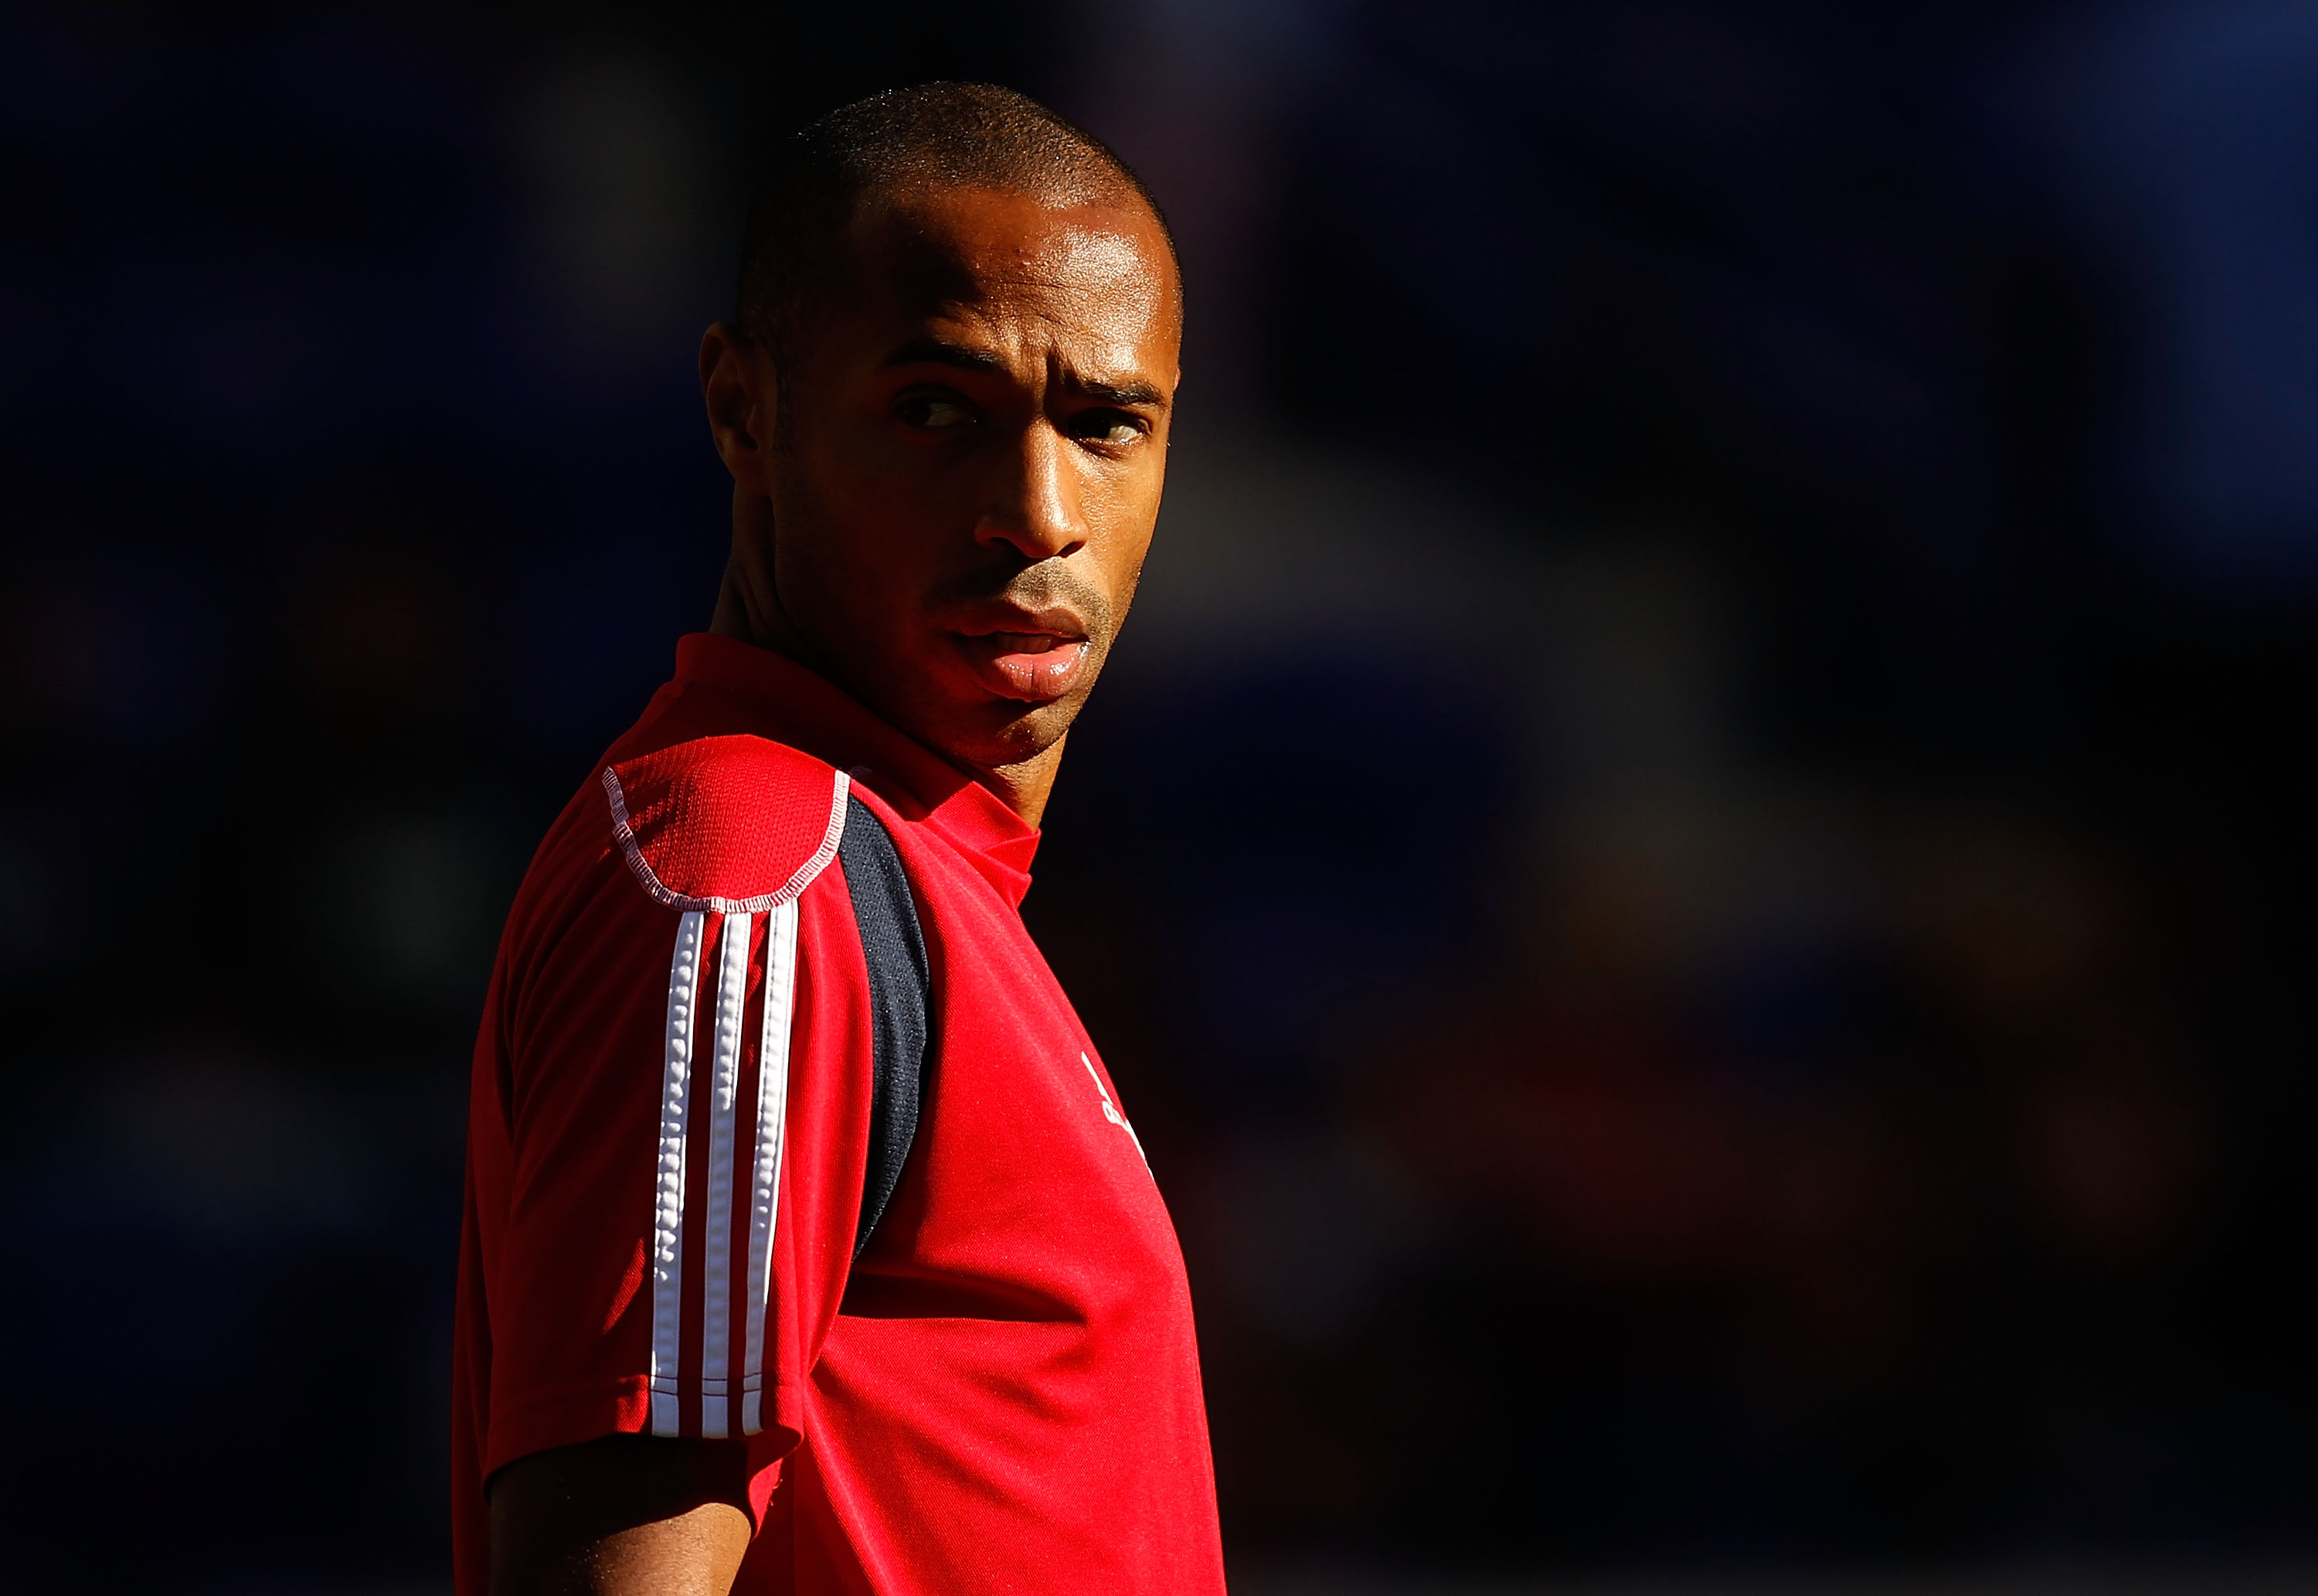 HARRISON, NJ - OCTOBER 09:  Thierry Henry #14 of the New York Red Bulls looks on against Real Salt Lake on October 9, 2010 at Red Bull Arena in Harrison, New Jersey. Red Bulls tied Real Salt Lake 0-0.  (Photo by Mike Stobe/Getty Images for New York Red Bu